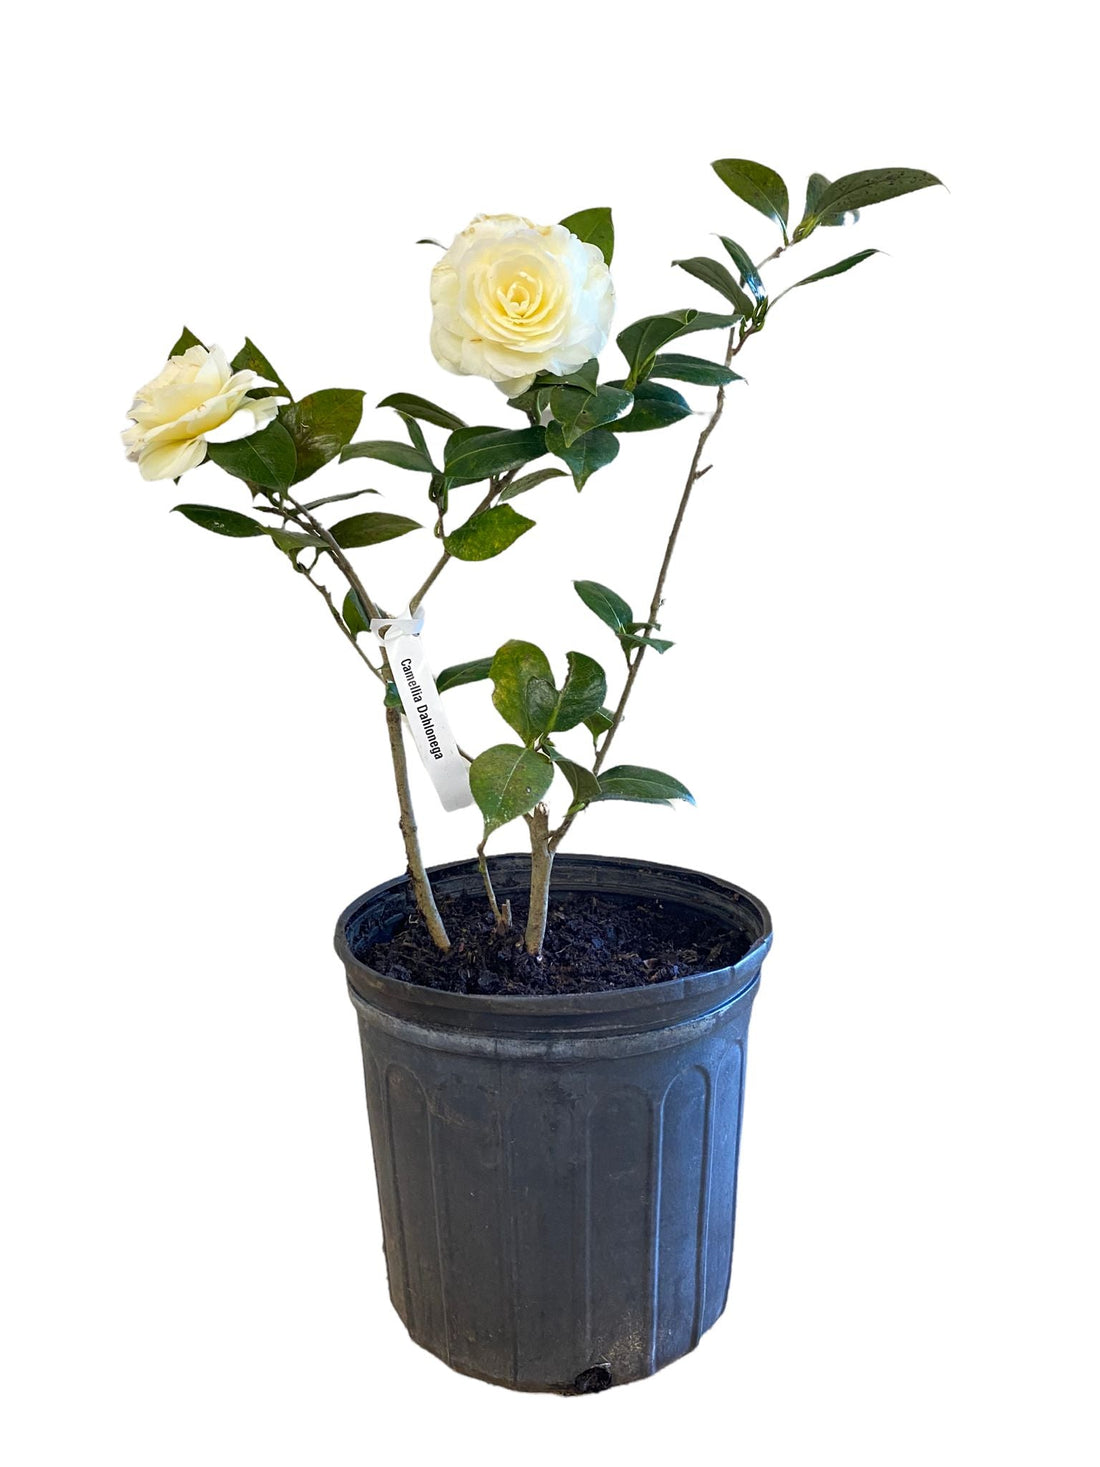 Camellia Jurys Yellow Flower Plant- Exotic Yellow Beauty. Gorgeous Yellow Camellia with Yellow To Pale Yellow Blooms.